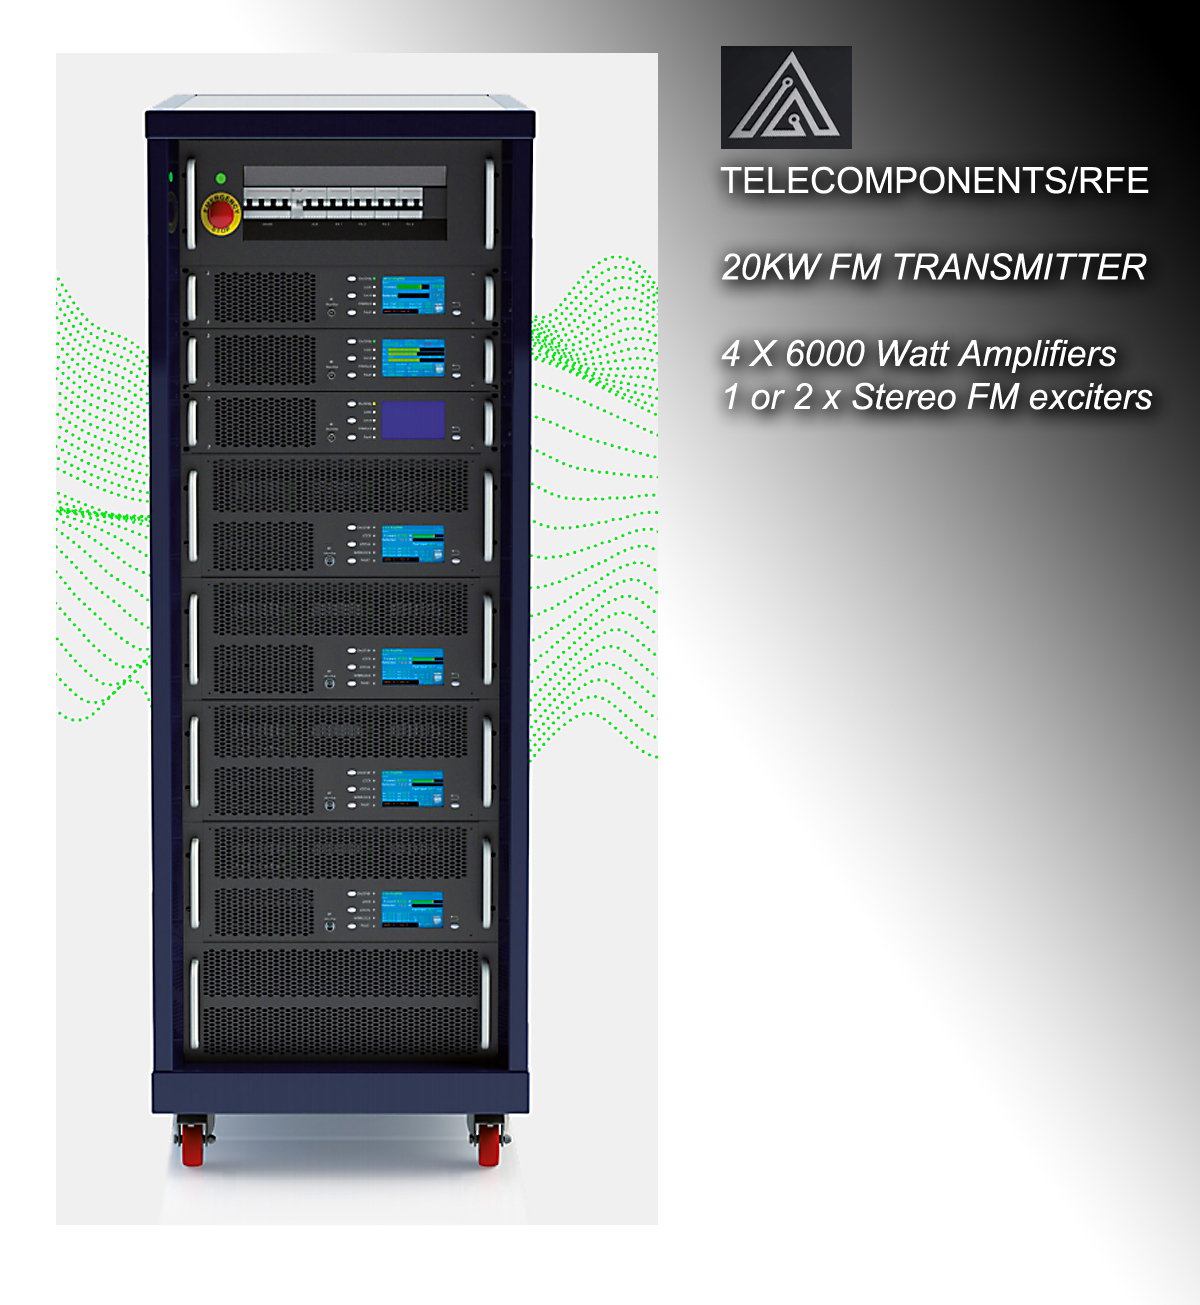 22 Kw TLDS/20000 FM Telecomponents transmitter